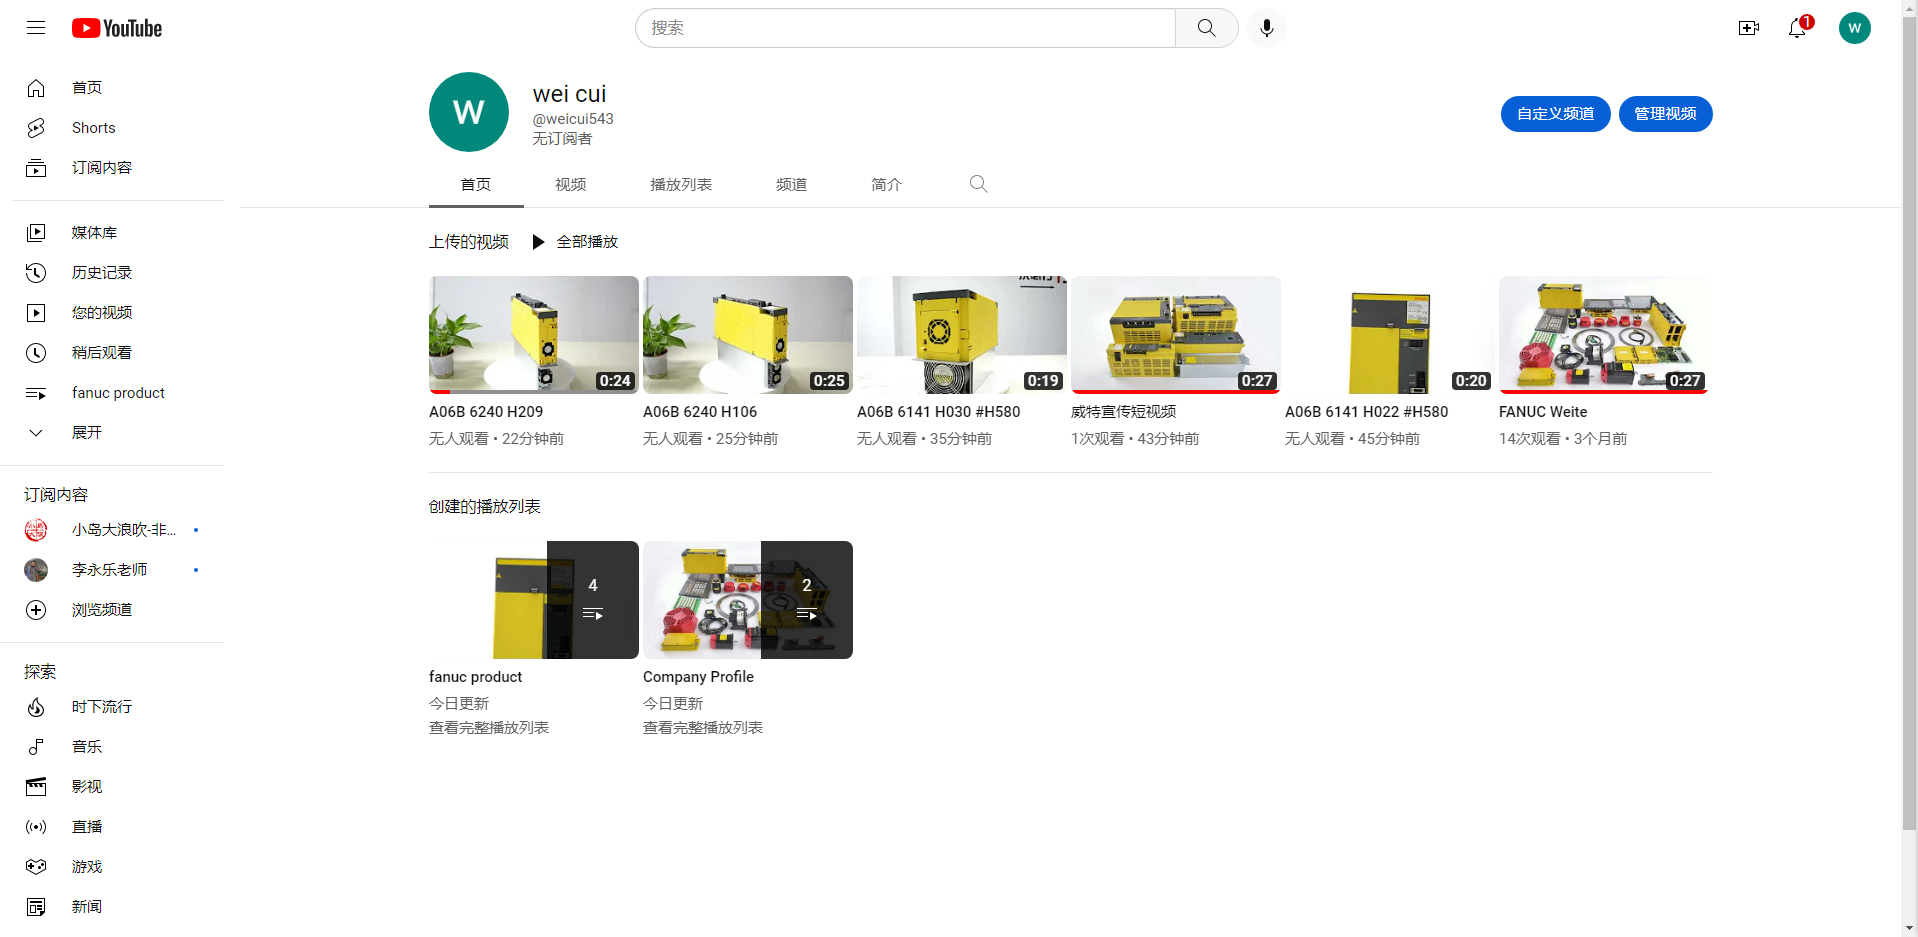 We have our own YouTube（Weite Fanuc）